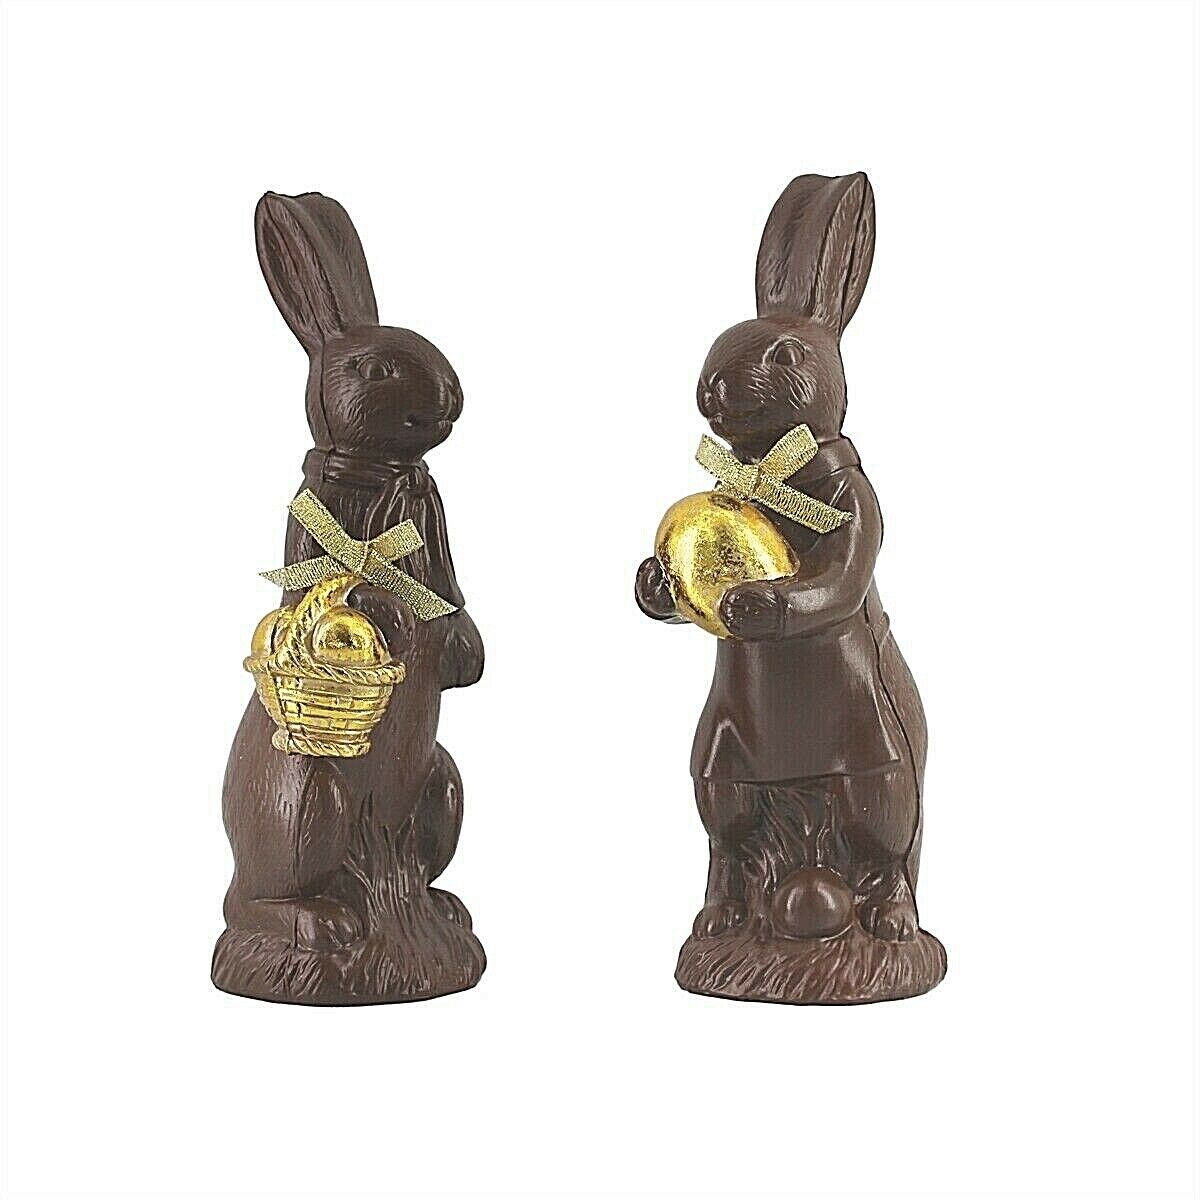 Spring Easter Chocolate Easter Rabbit Figure Tall 2 Styles - The Primitive Pineapple Collection